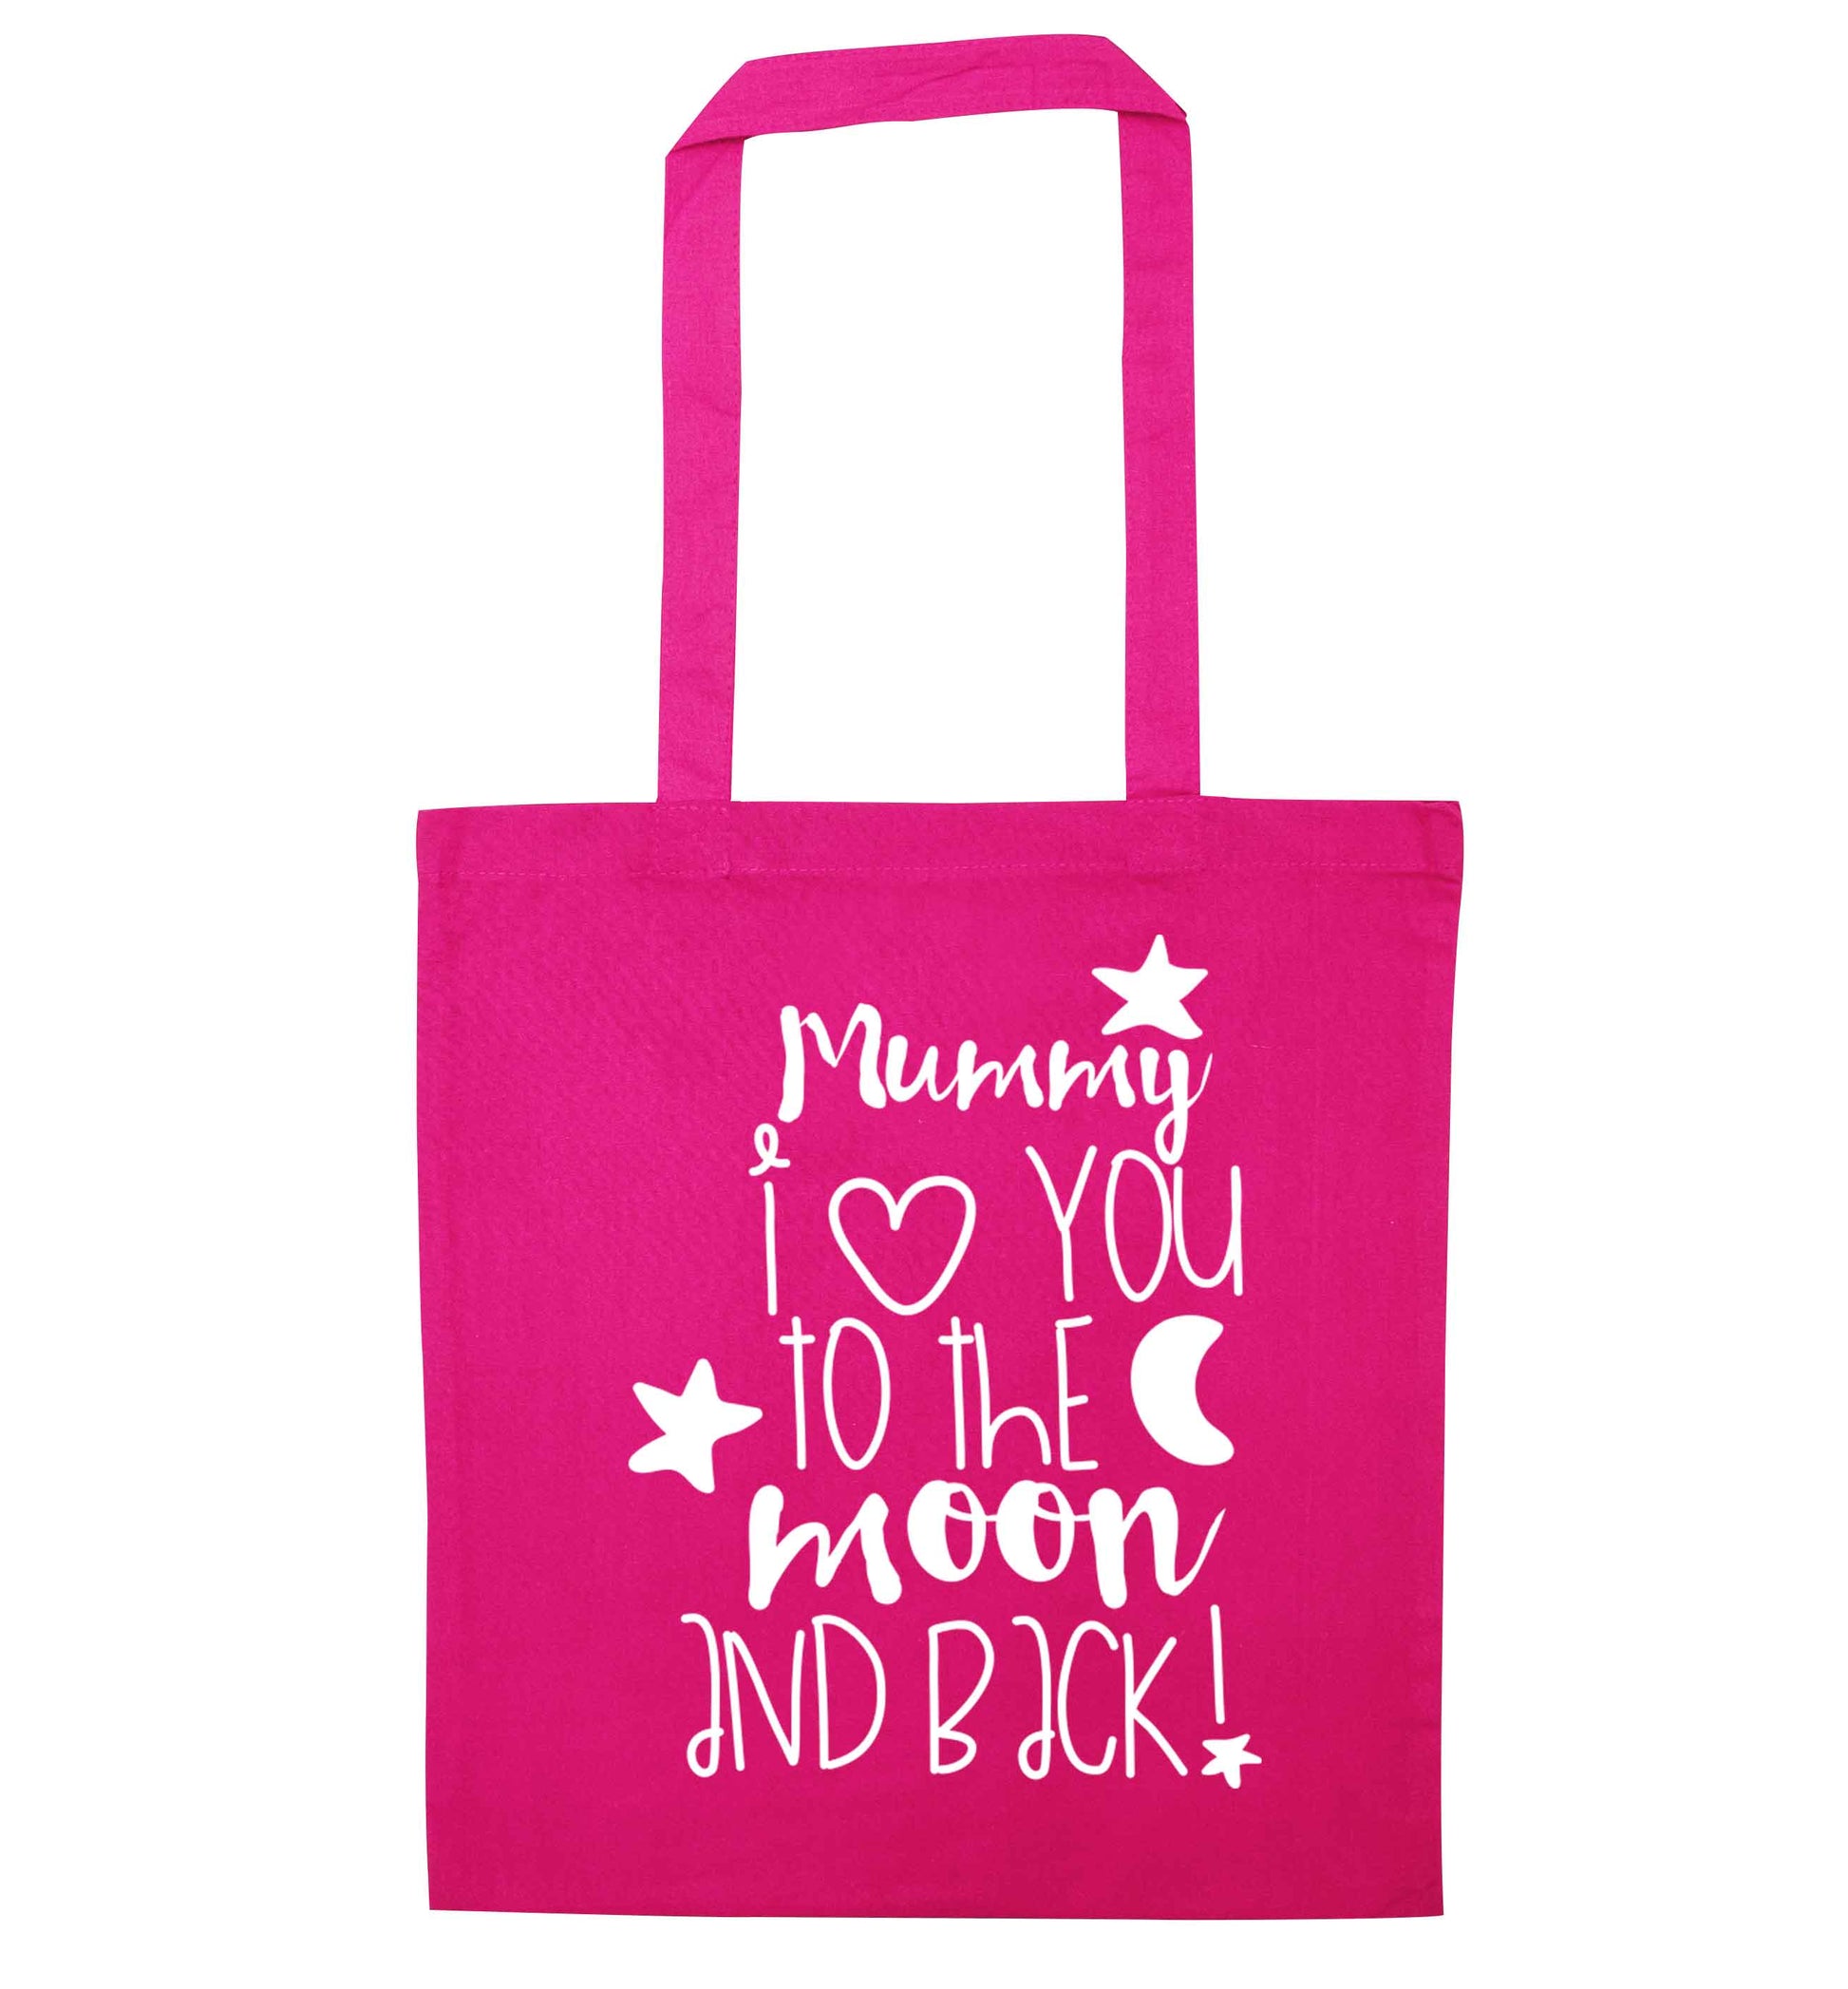 Mummy I love you to the moon and back pink tote bag